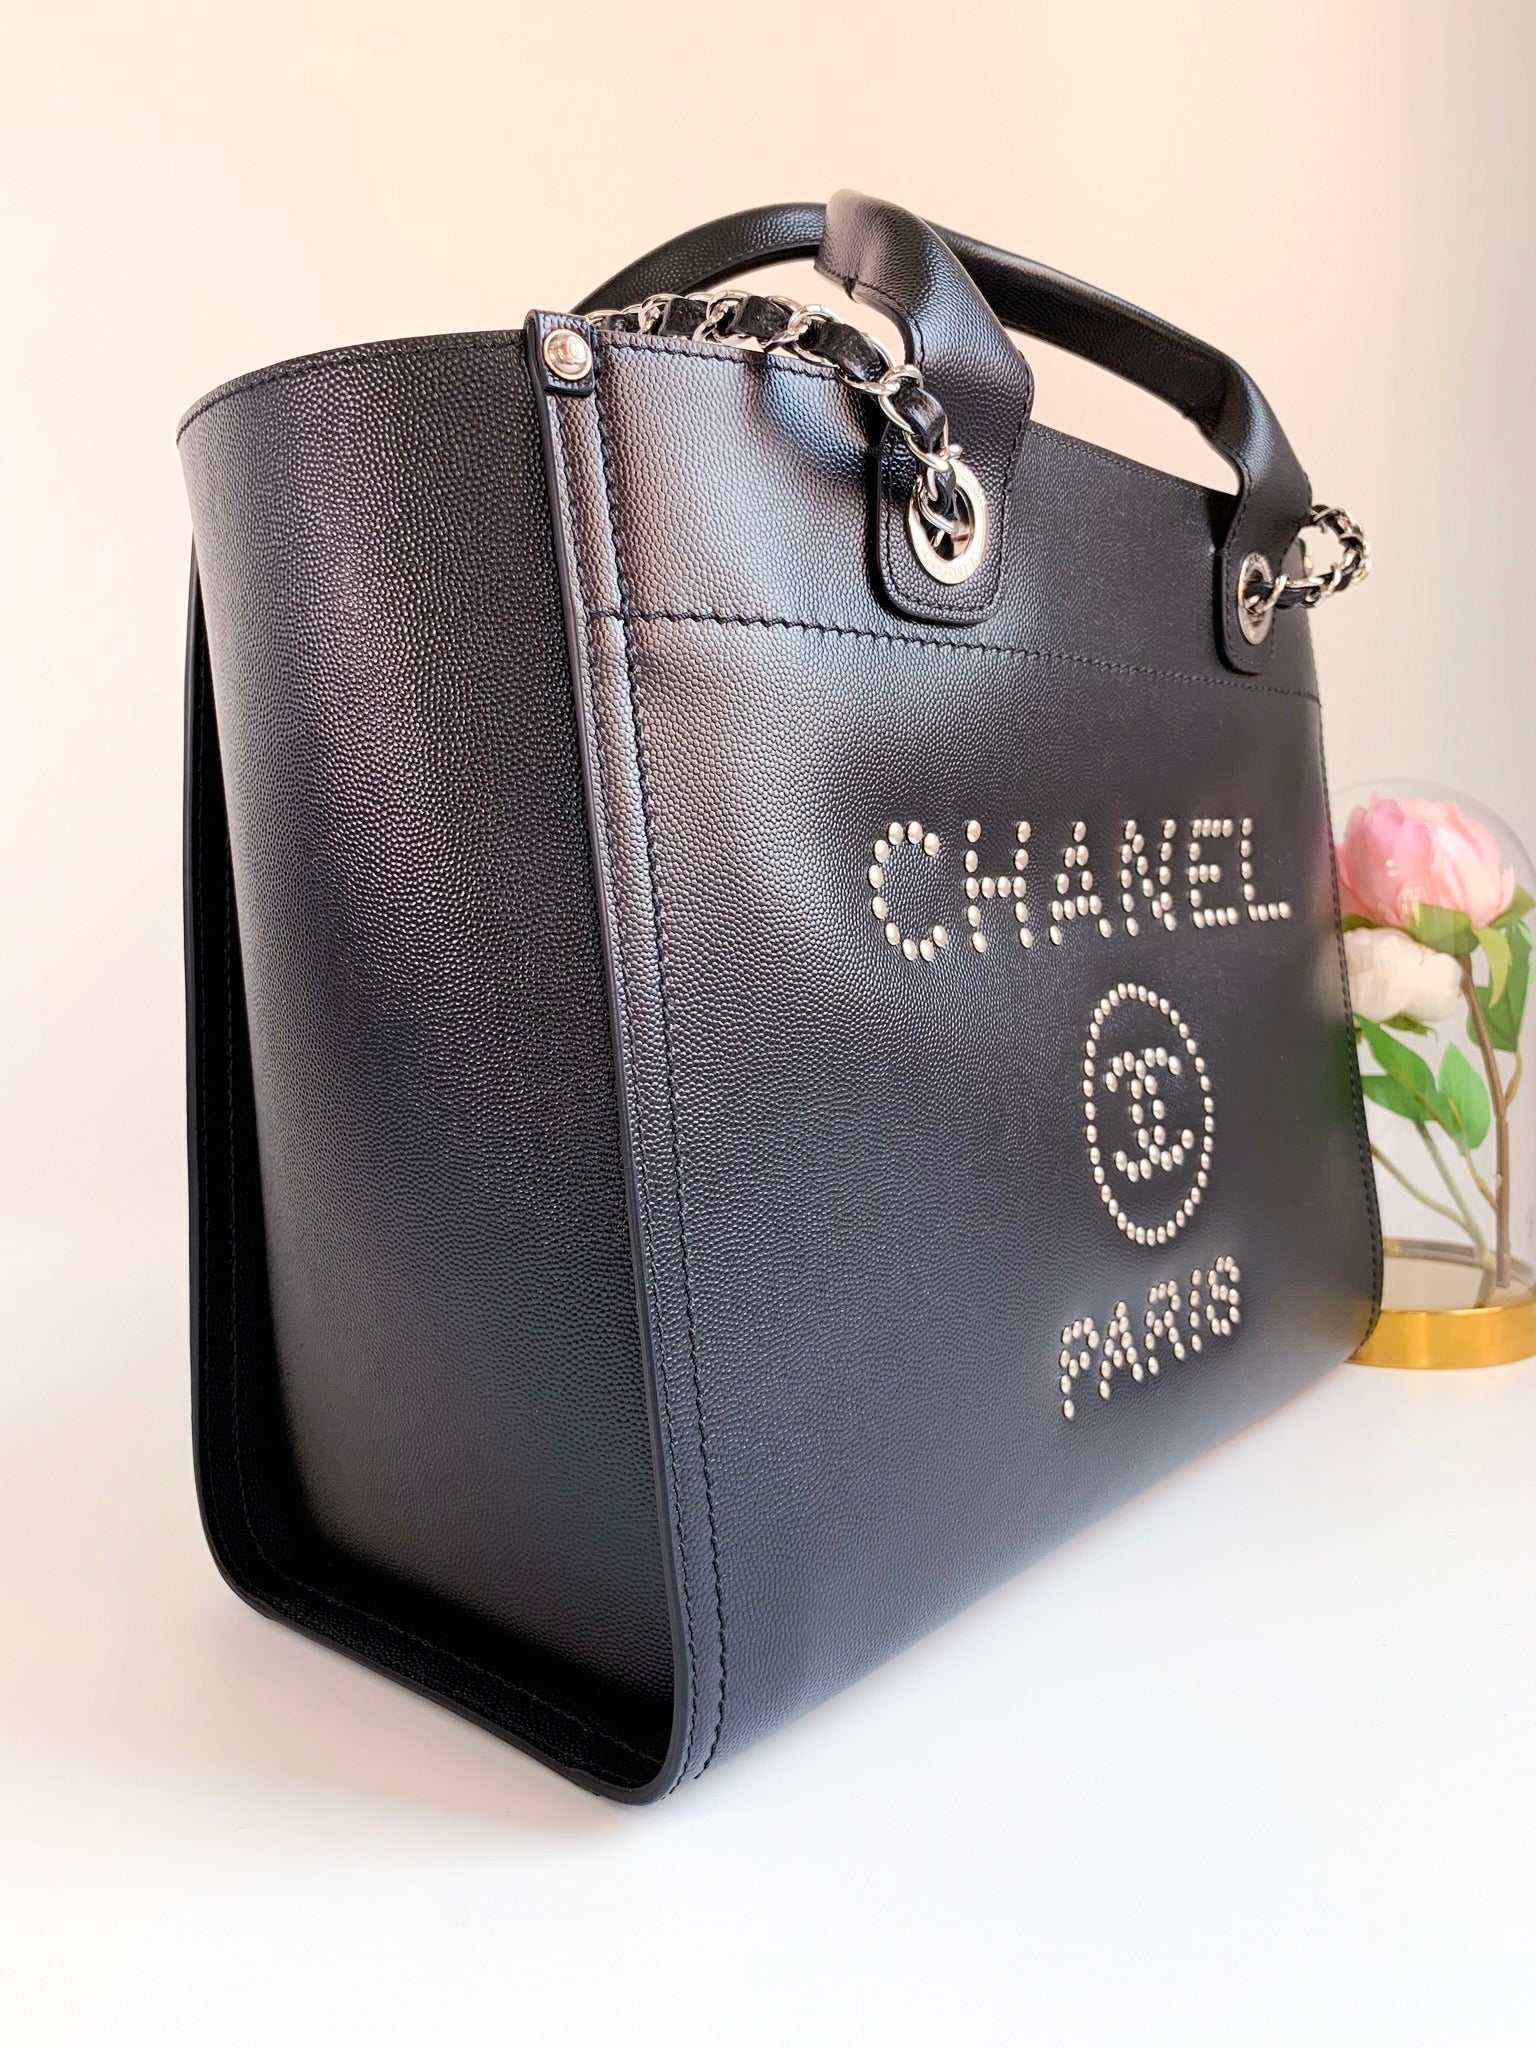 Chanel Small Deauville Shopping Bag Black